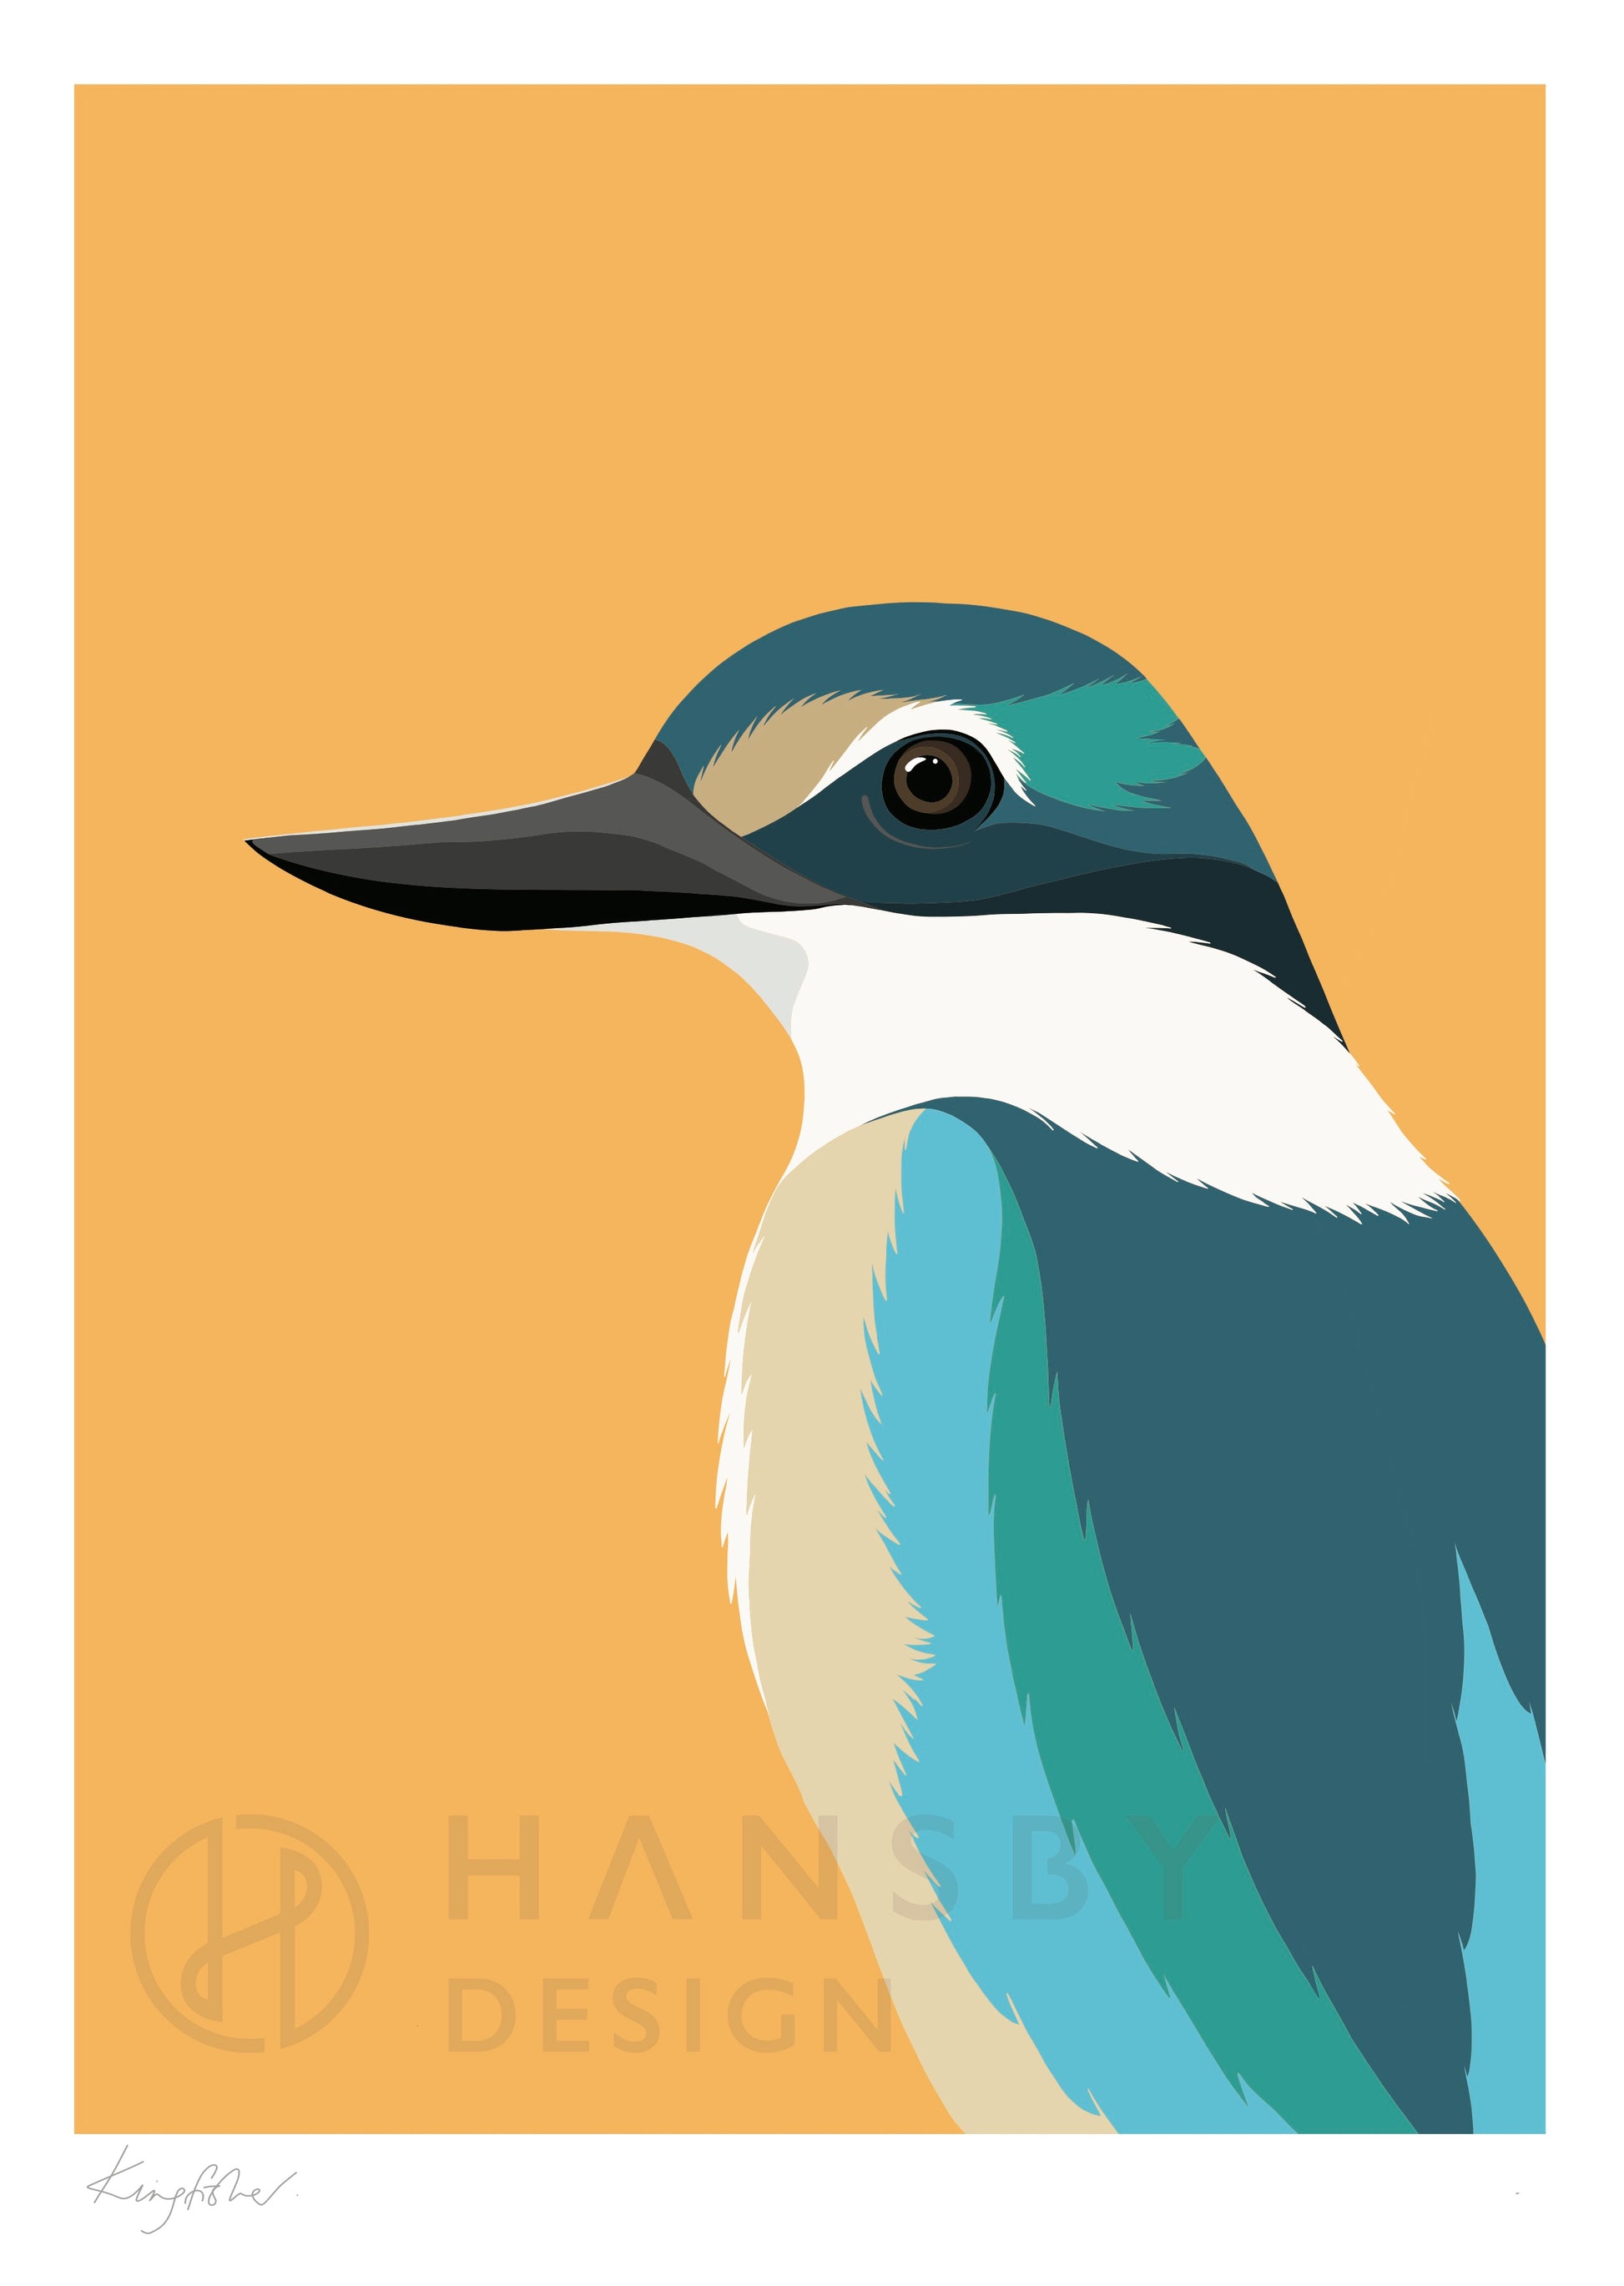 Art print of the Kingfisher bird by Hansby Design, New Zealand